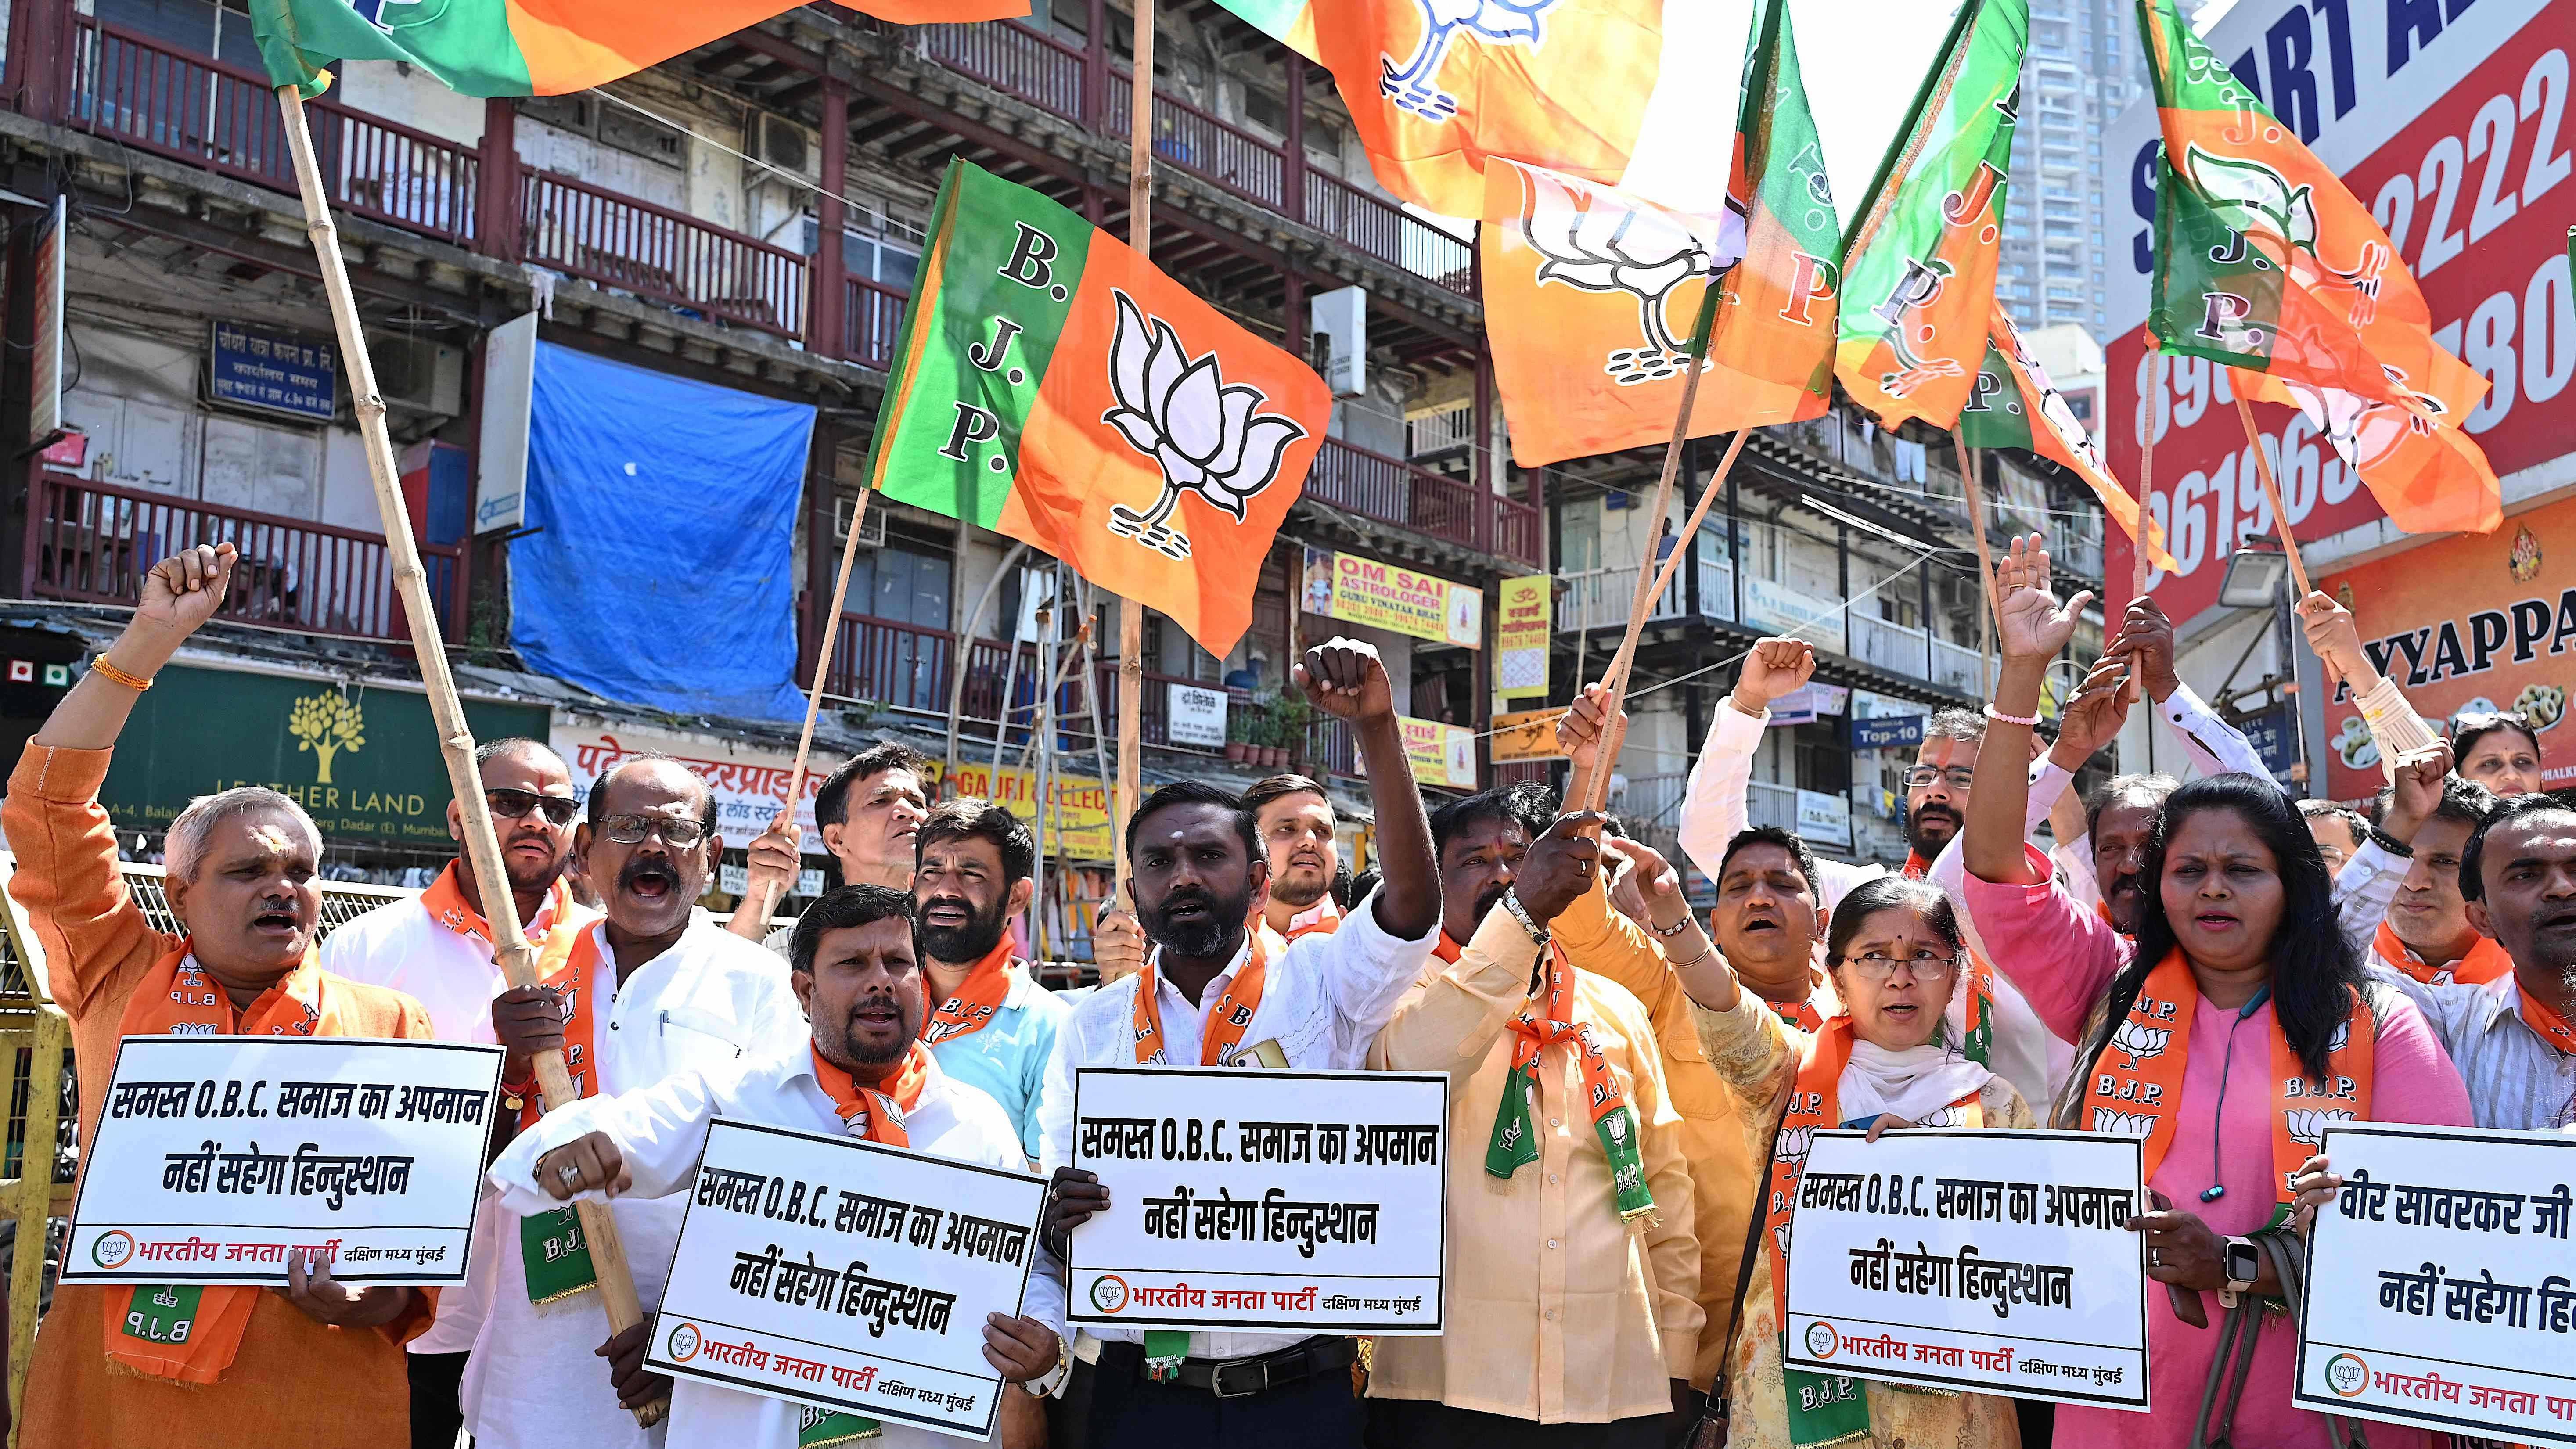 Activists of the Bharatiya Janata Party (BJP) take part in a protest against Congress party leader Rahul Gandhi in Mumbai on March 25, 2023. Credit: AFP Photo